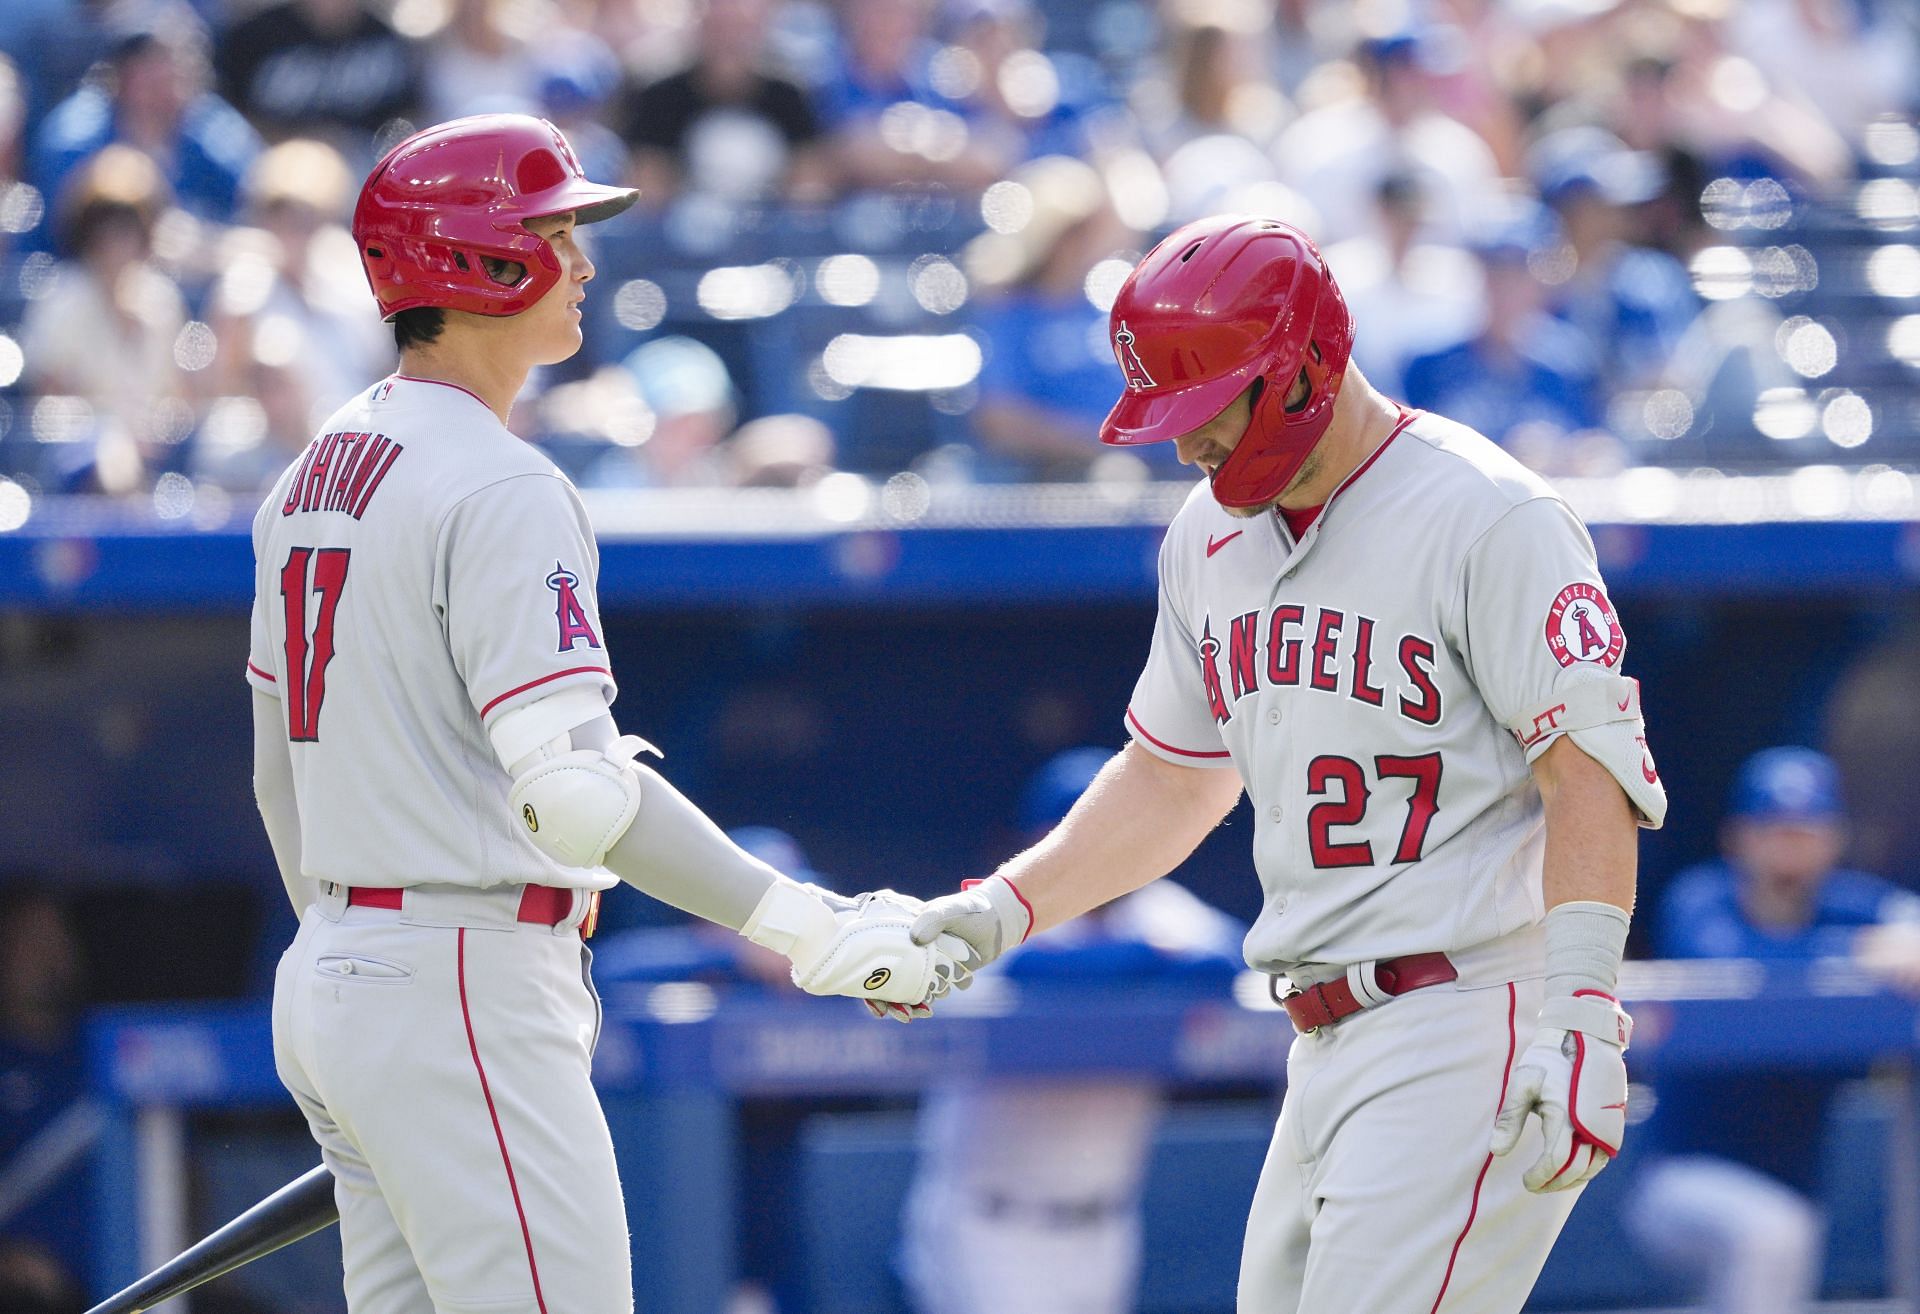 Incredible photo of Mike Trout and Shohei Ohtani celebrating goes